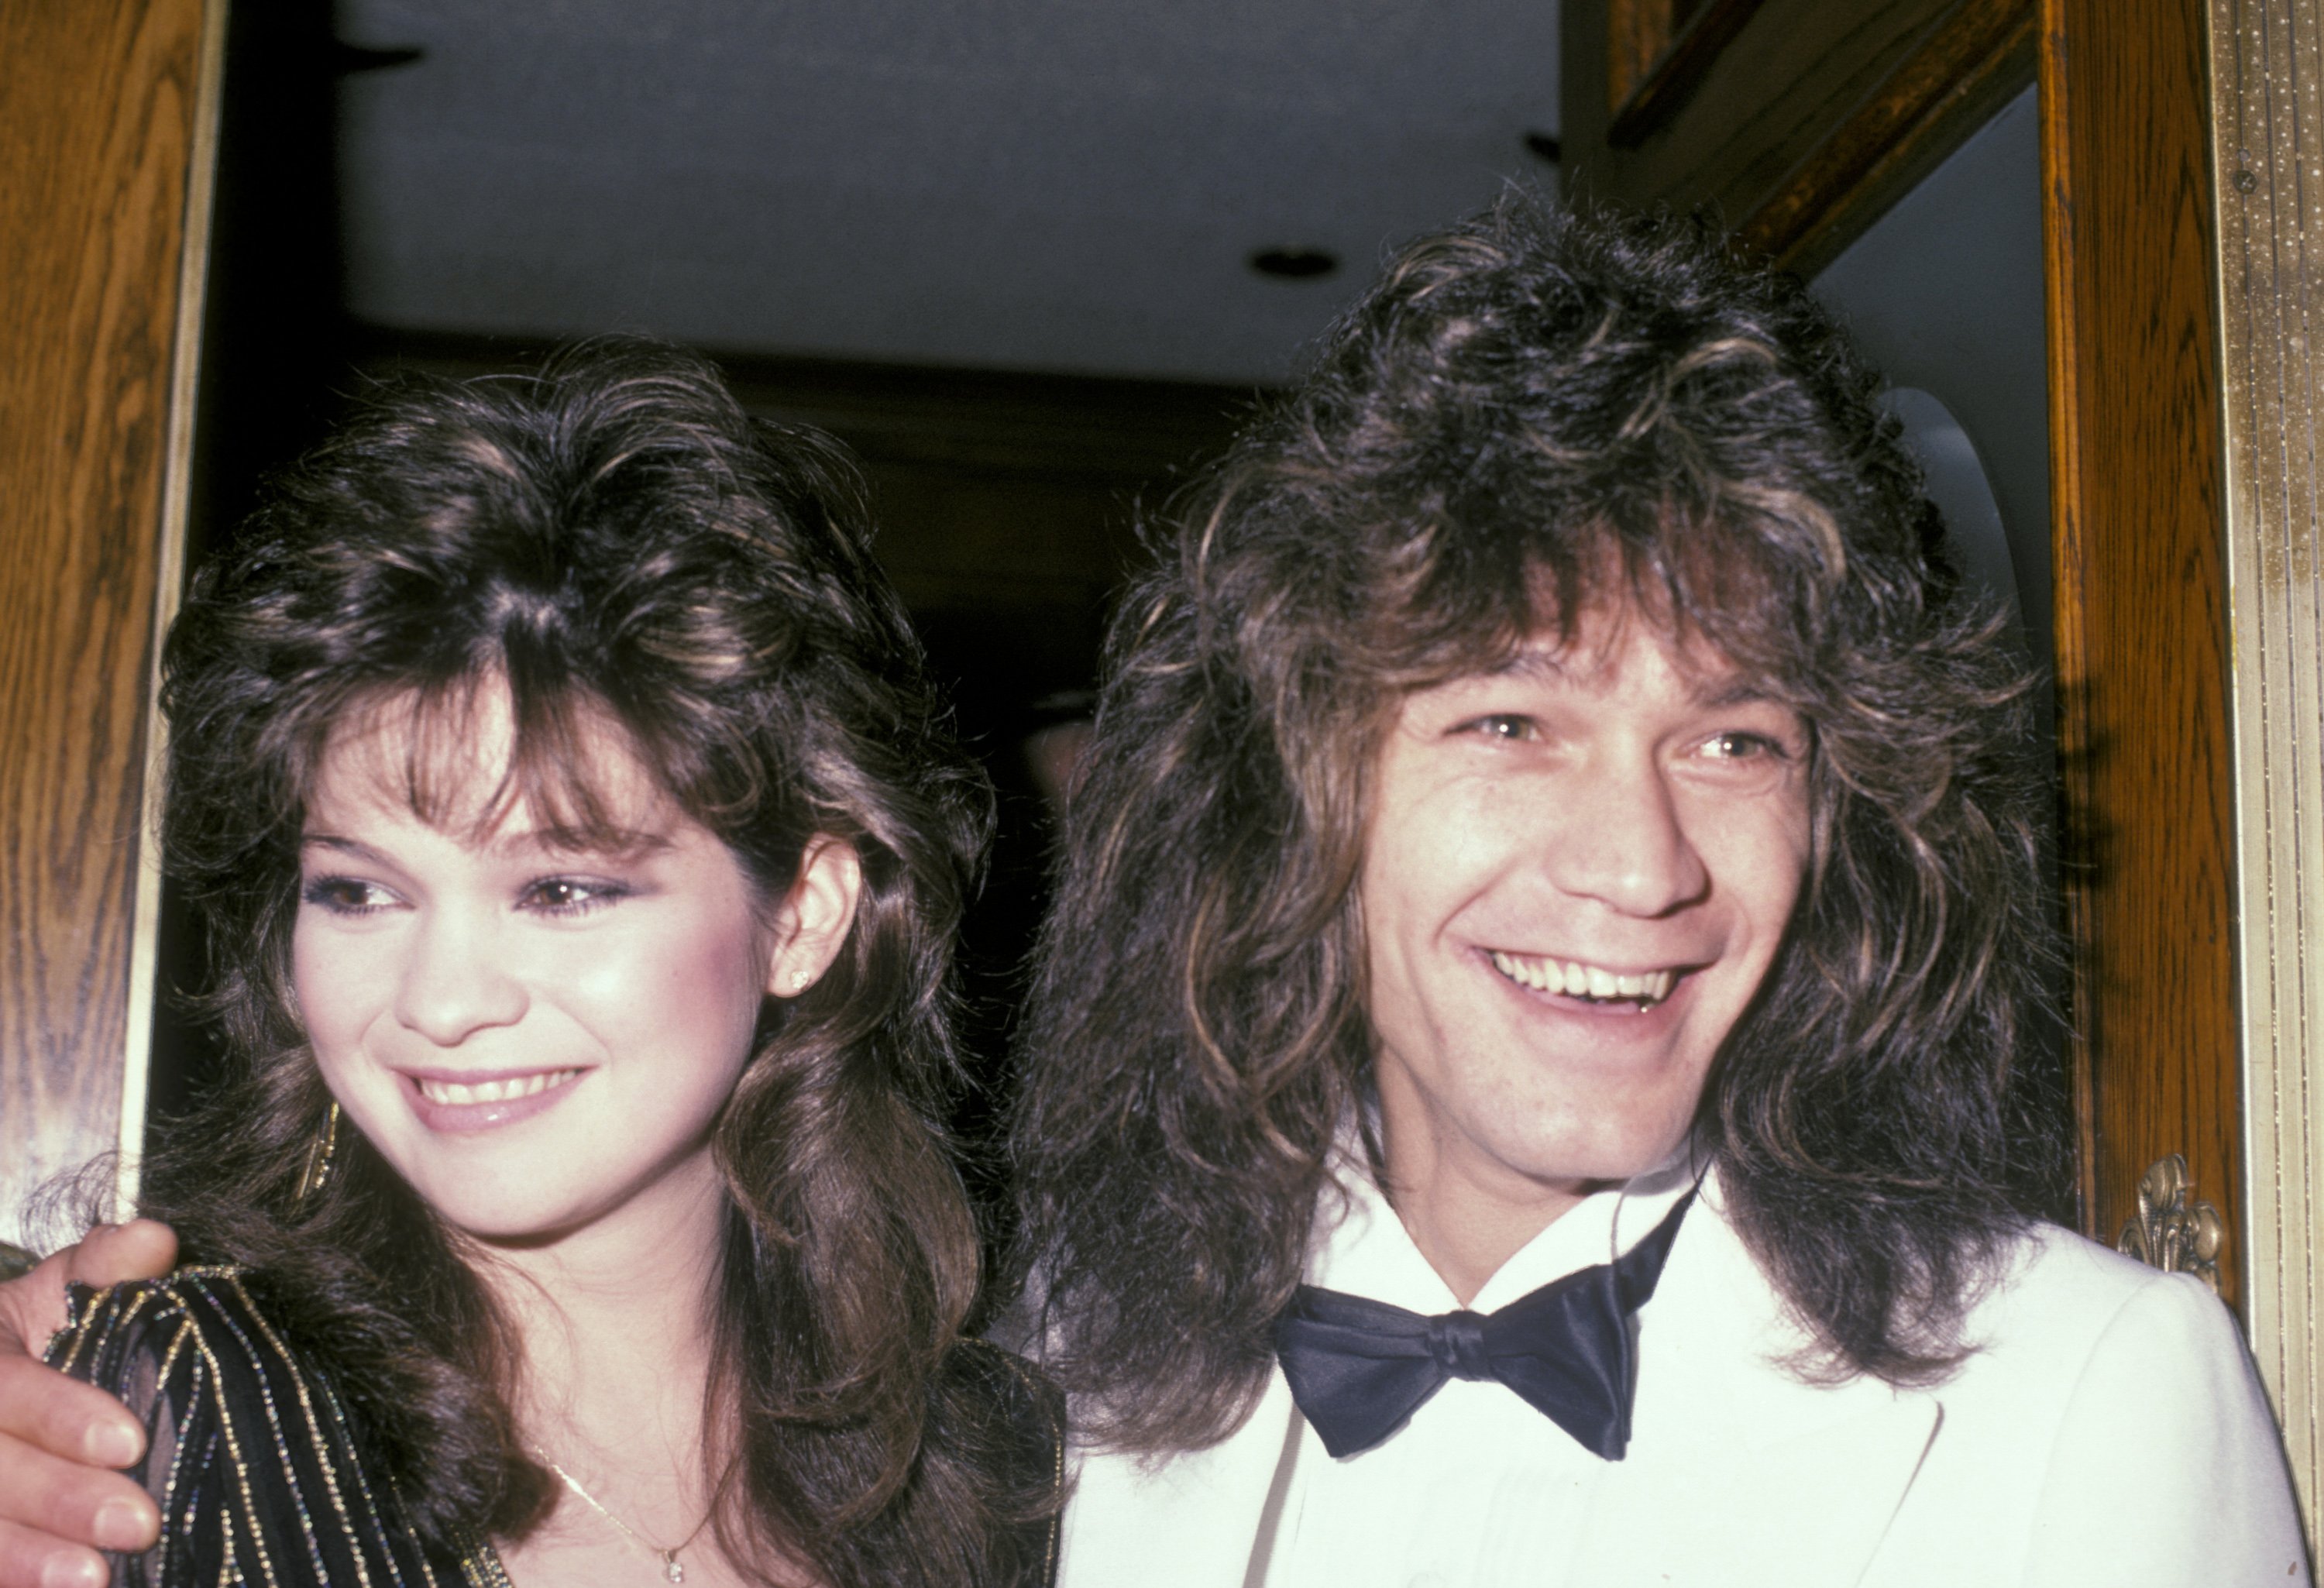 Actor Valerie Bertinelli and then-husband Eddie Van Halen attend the 'One Day at a Time' wrap party in 1983.